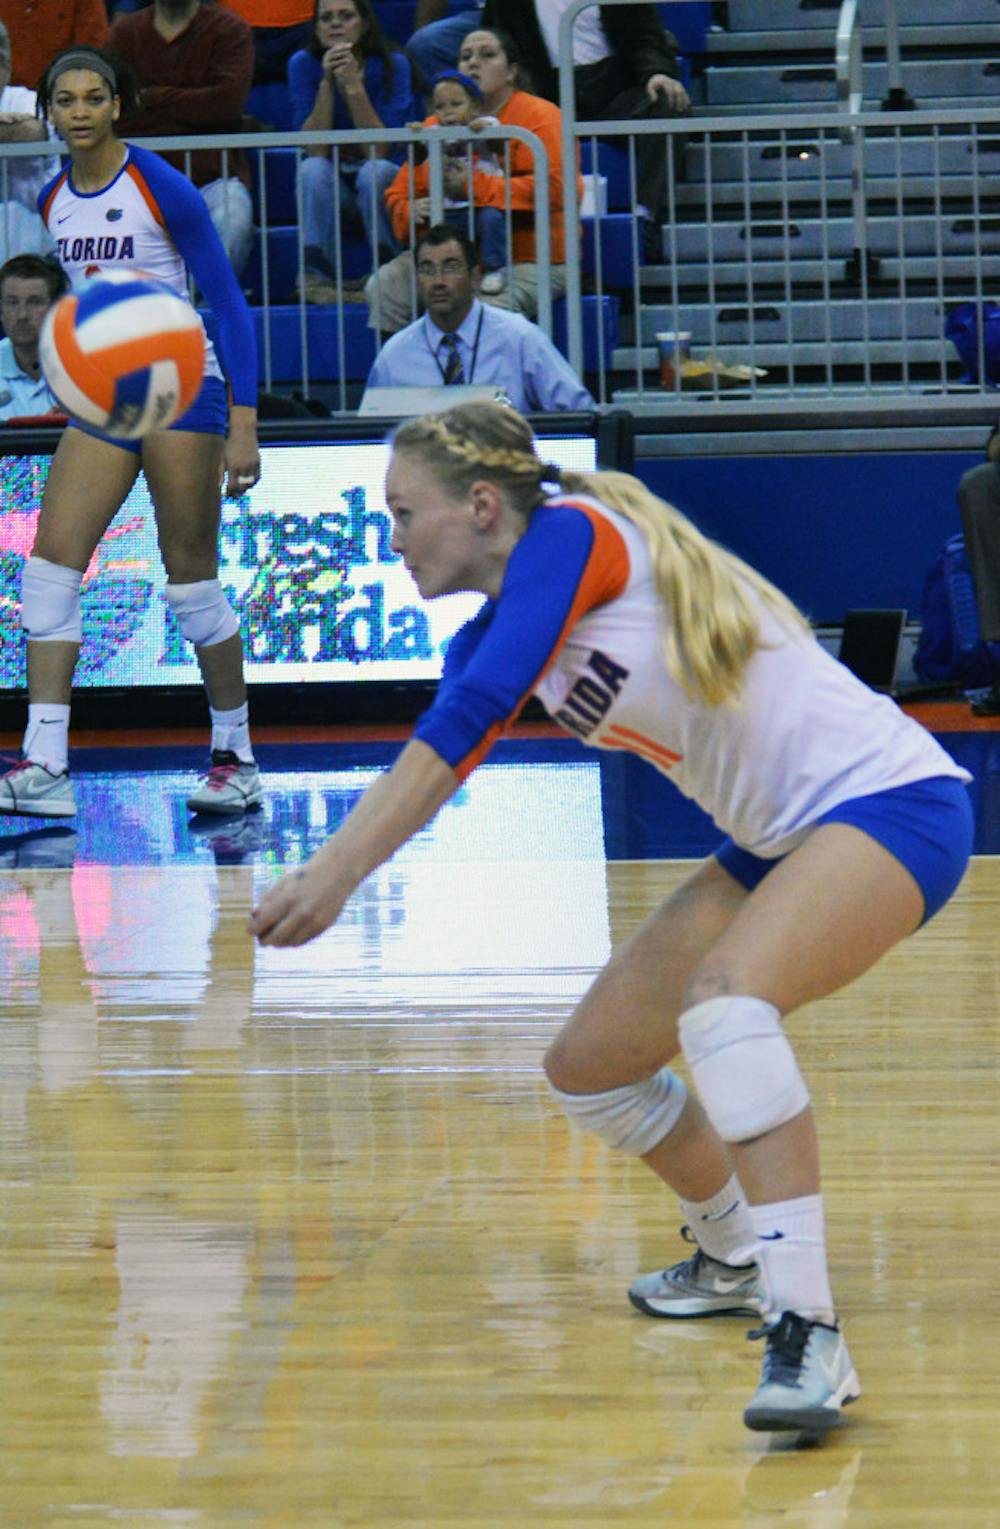 <p>Maddy Monserez digs a ball during Florida's 3-0 win against Missouri on Friday in the O'Connell Center.</p>